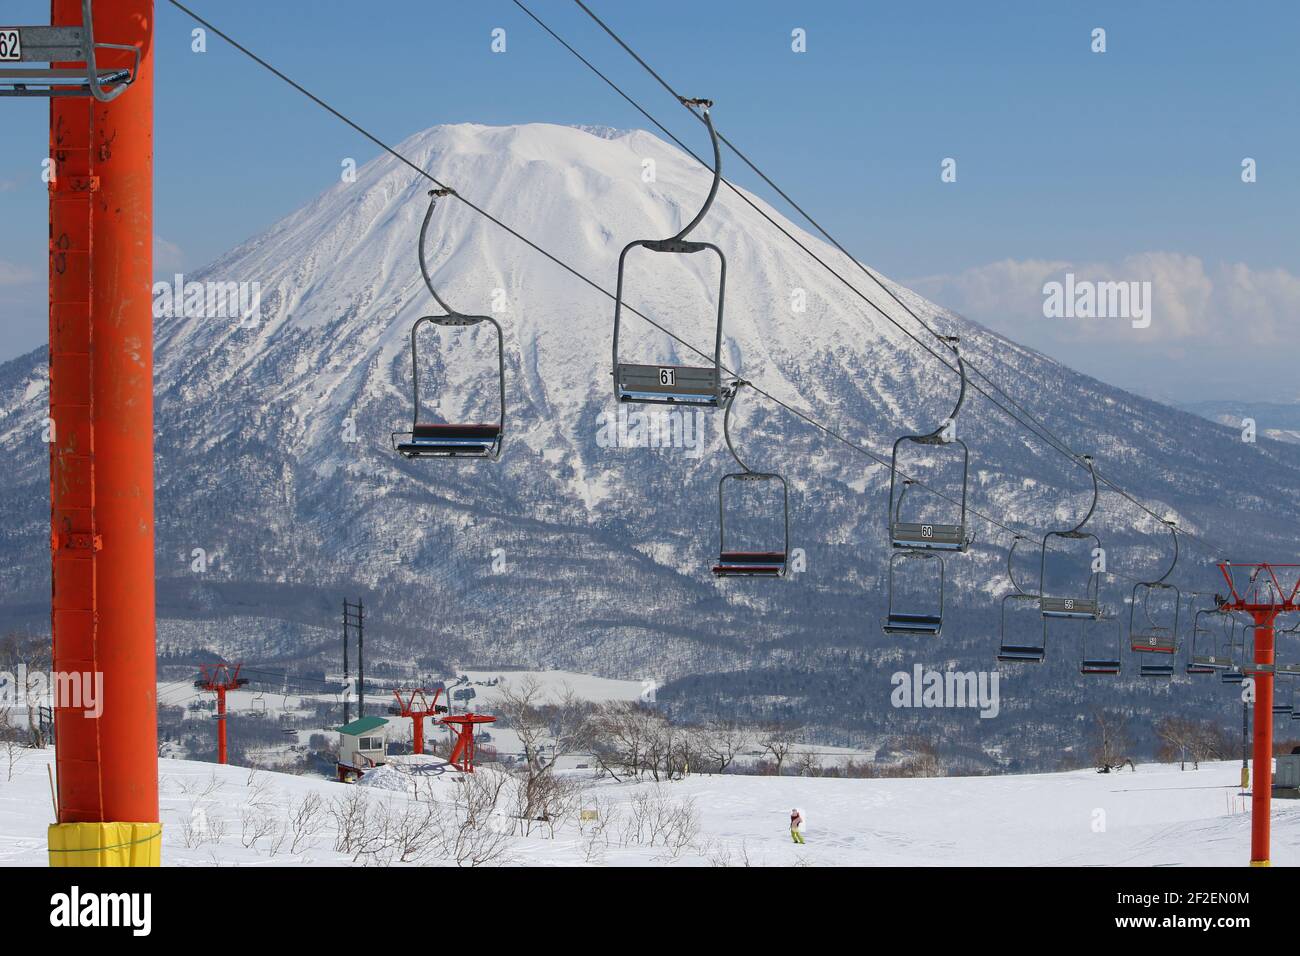 Empty chair lifts at a ski resort with a snow-capped volcano in the background, Niseko, Hokkaido, Japan Stock Photo